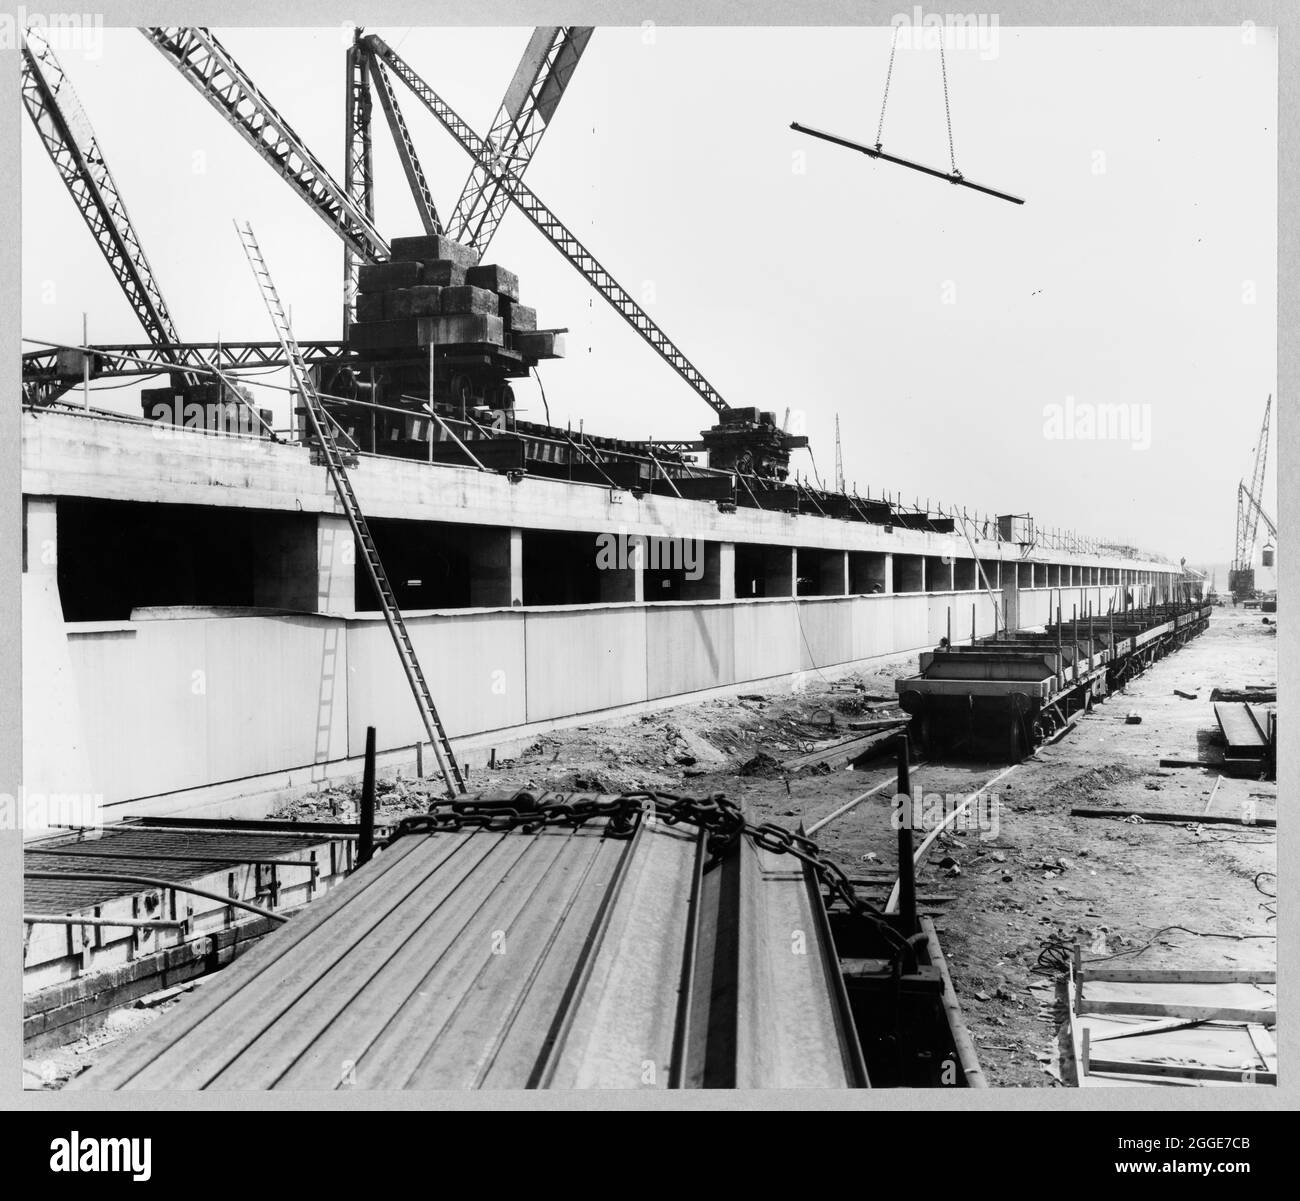 A view of the new foundry under construction at the Ford Motor Company Works, showing cladding panels being erected on part of the south elevation, and freight wagons on a rail track in the foreground with cranes working overhead. This image was catalogued as part of the Breaking New Ground Project in partnership with the John Laing Charitable Trust in 2019-20. Stock Photo